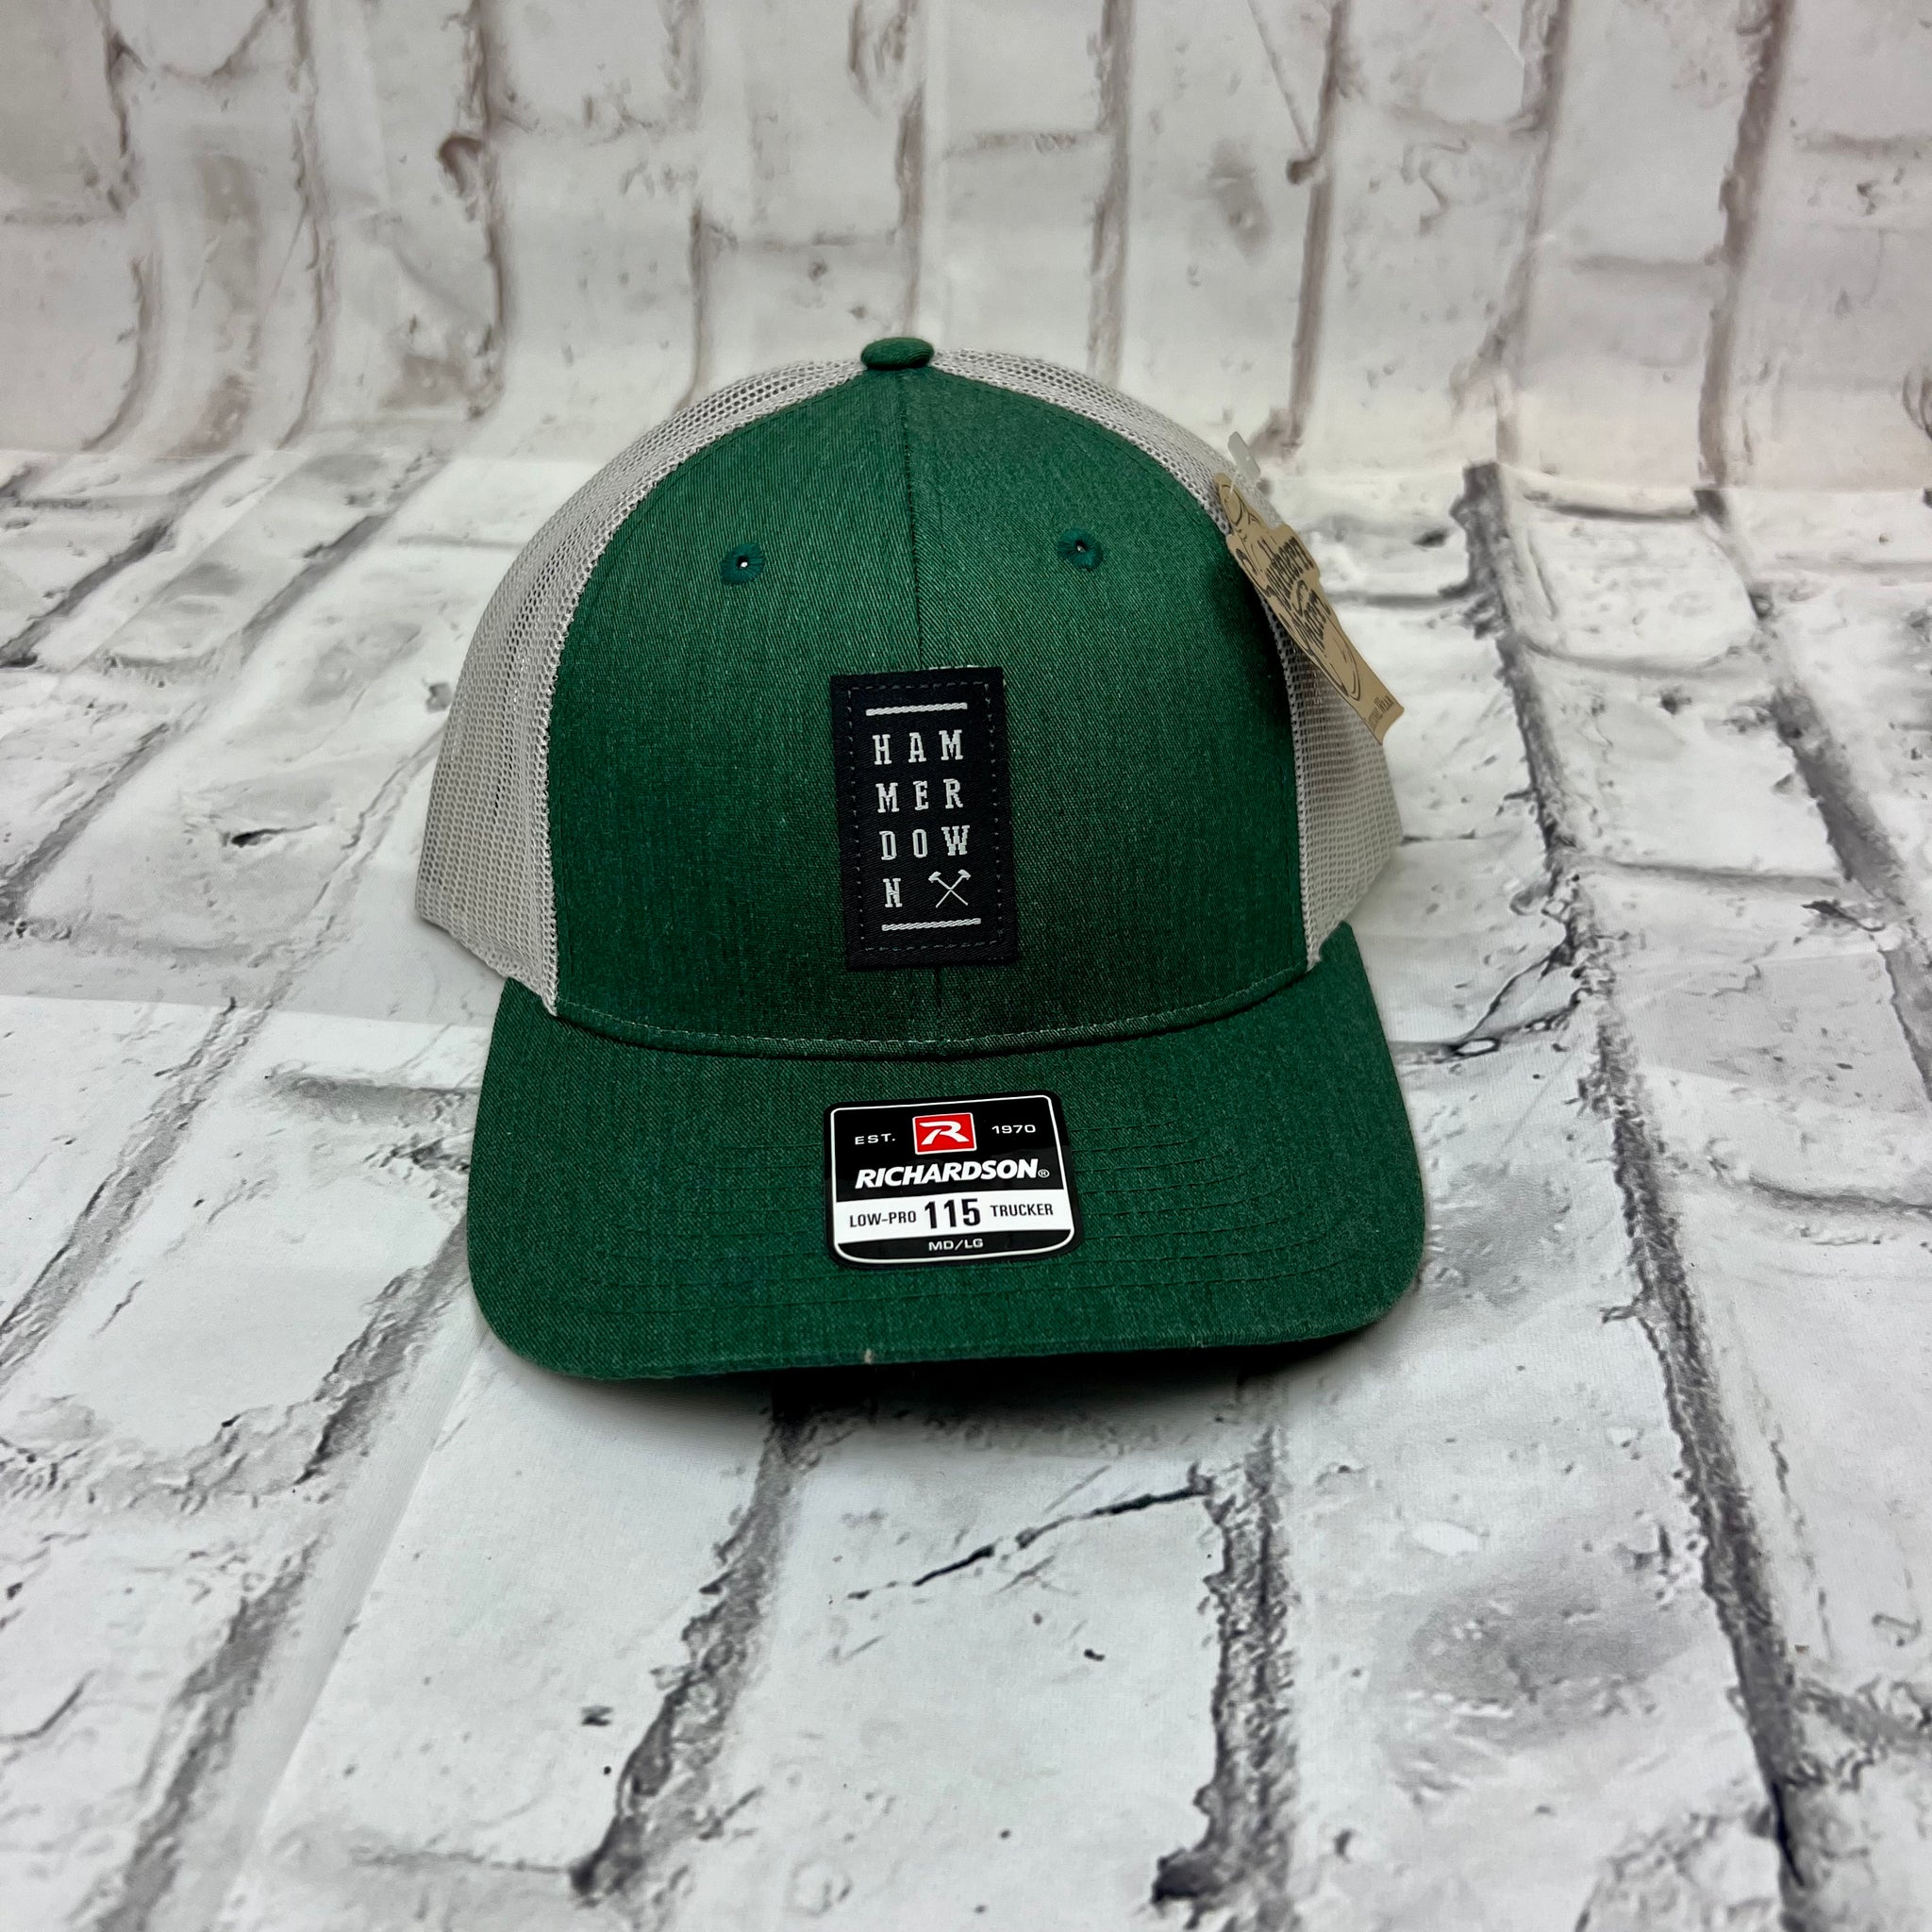 Hammer Down "HD Stack Patch" Hat - Dark Green and Light Gray with Leather Patch